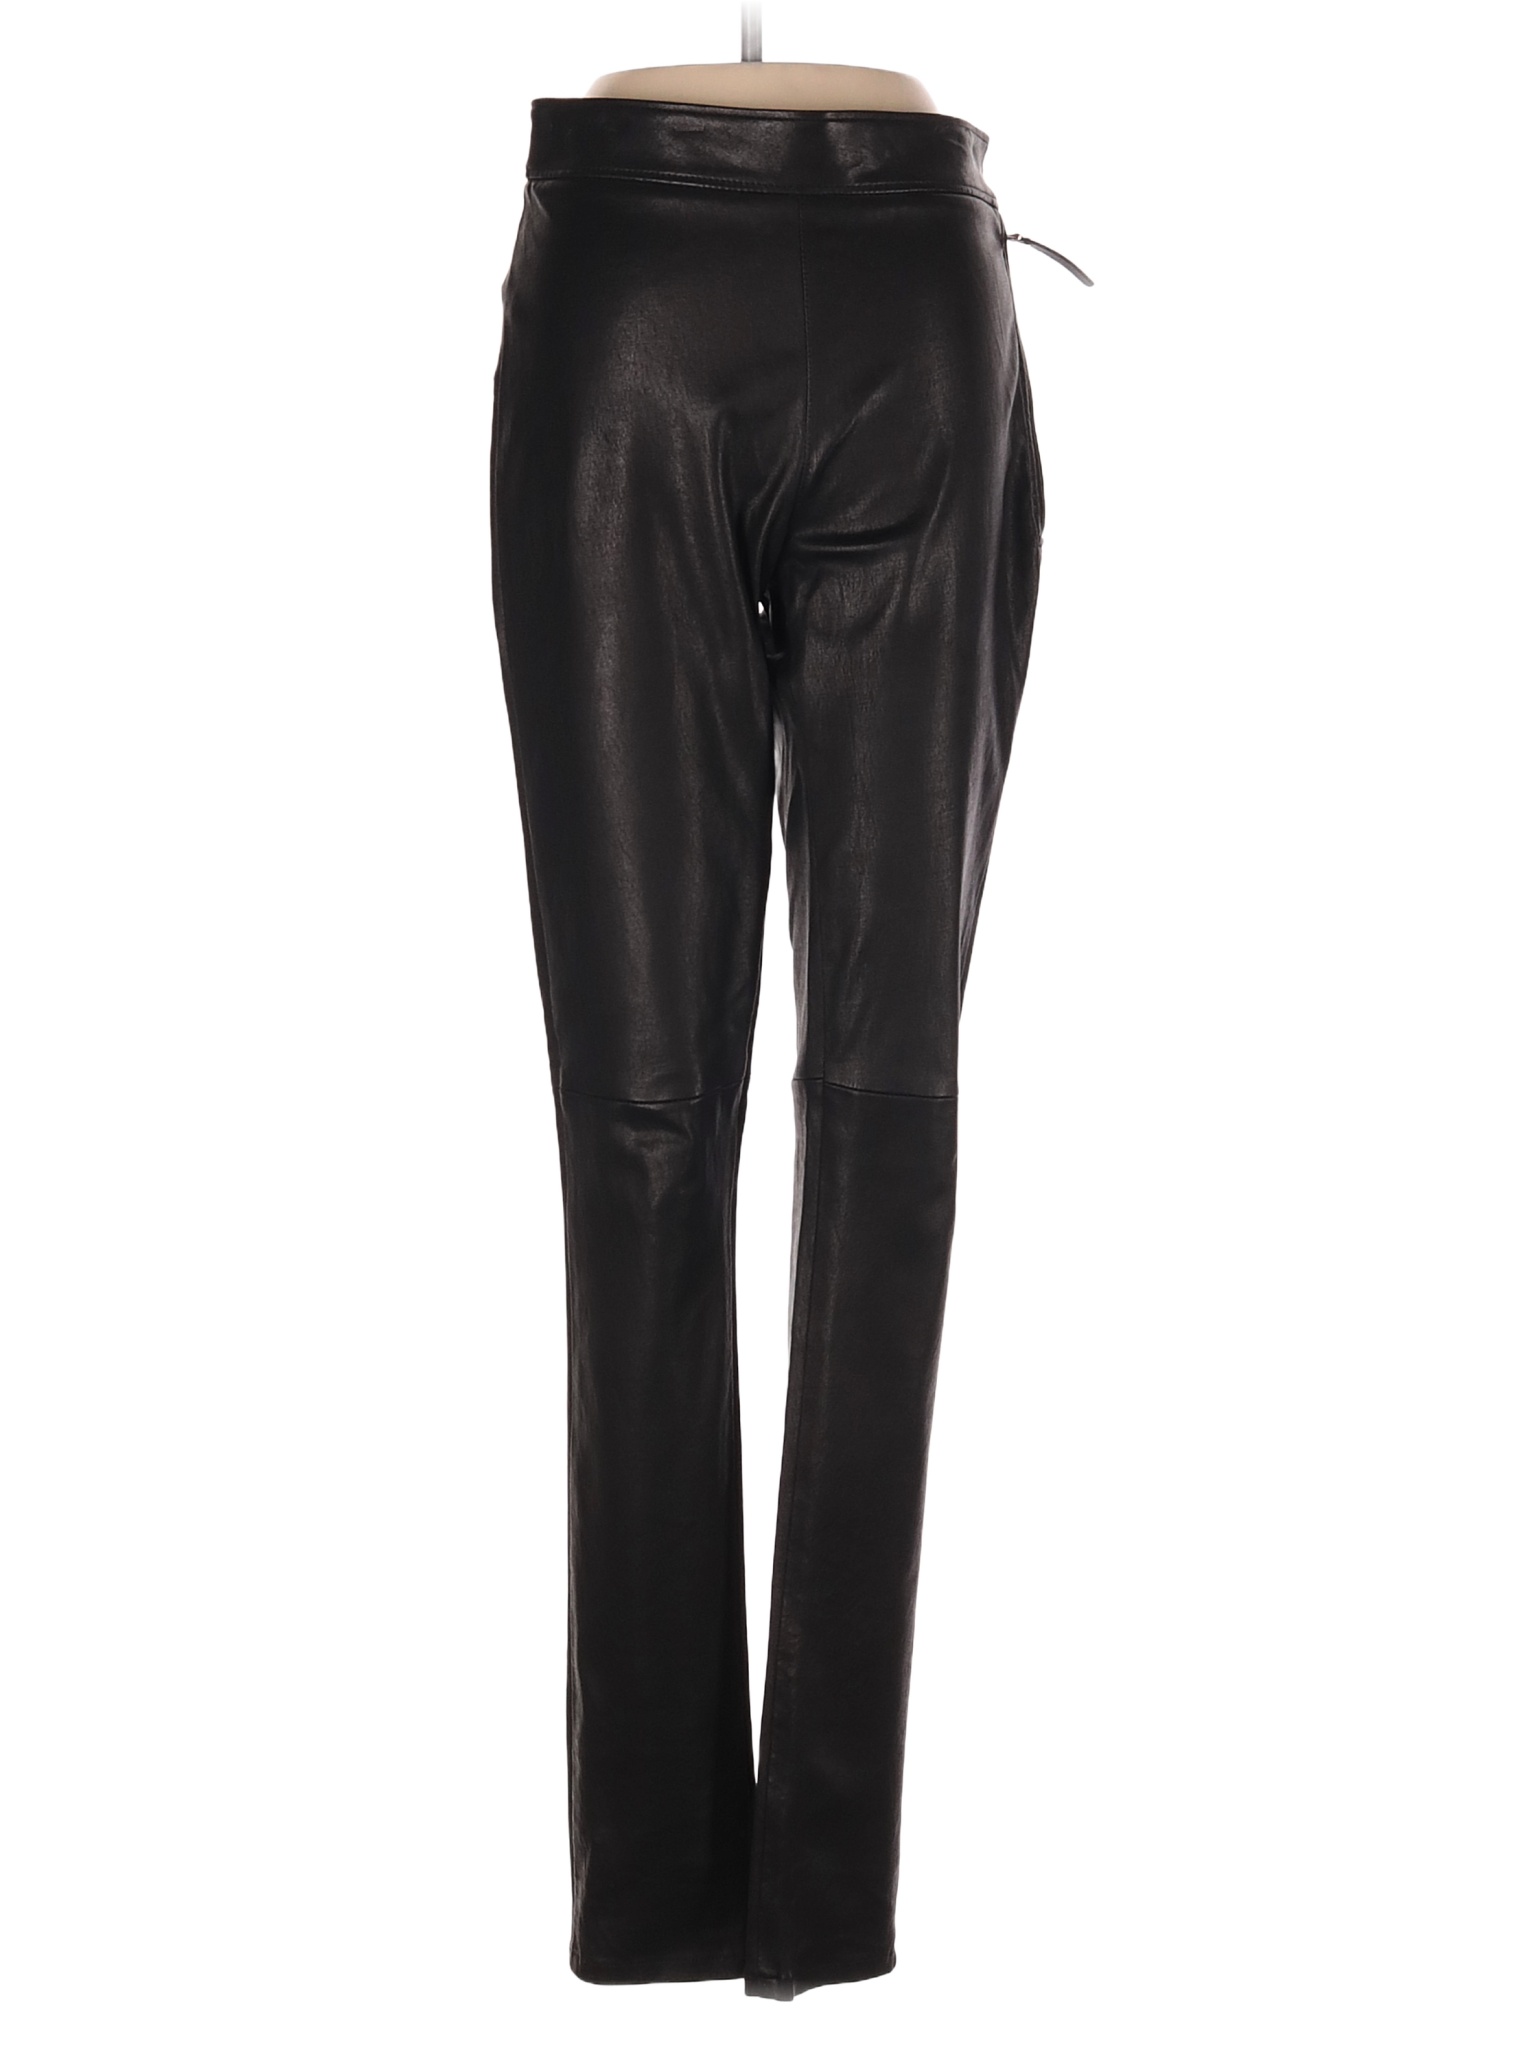 Roberto Cavalli 100% Leather Solid Black Leather Pants Size 38 (IT ...